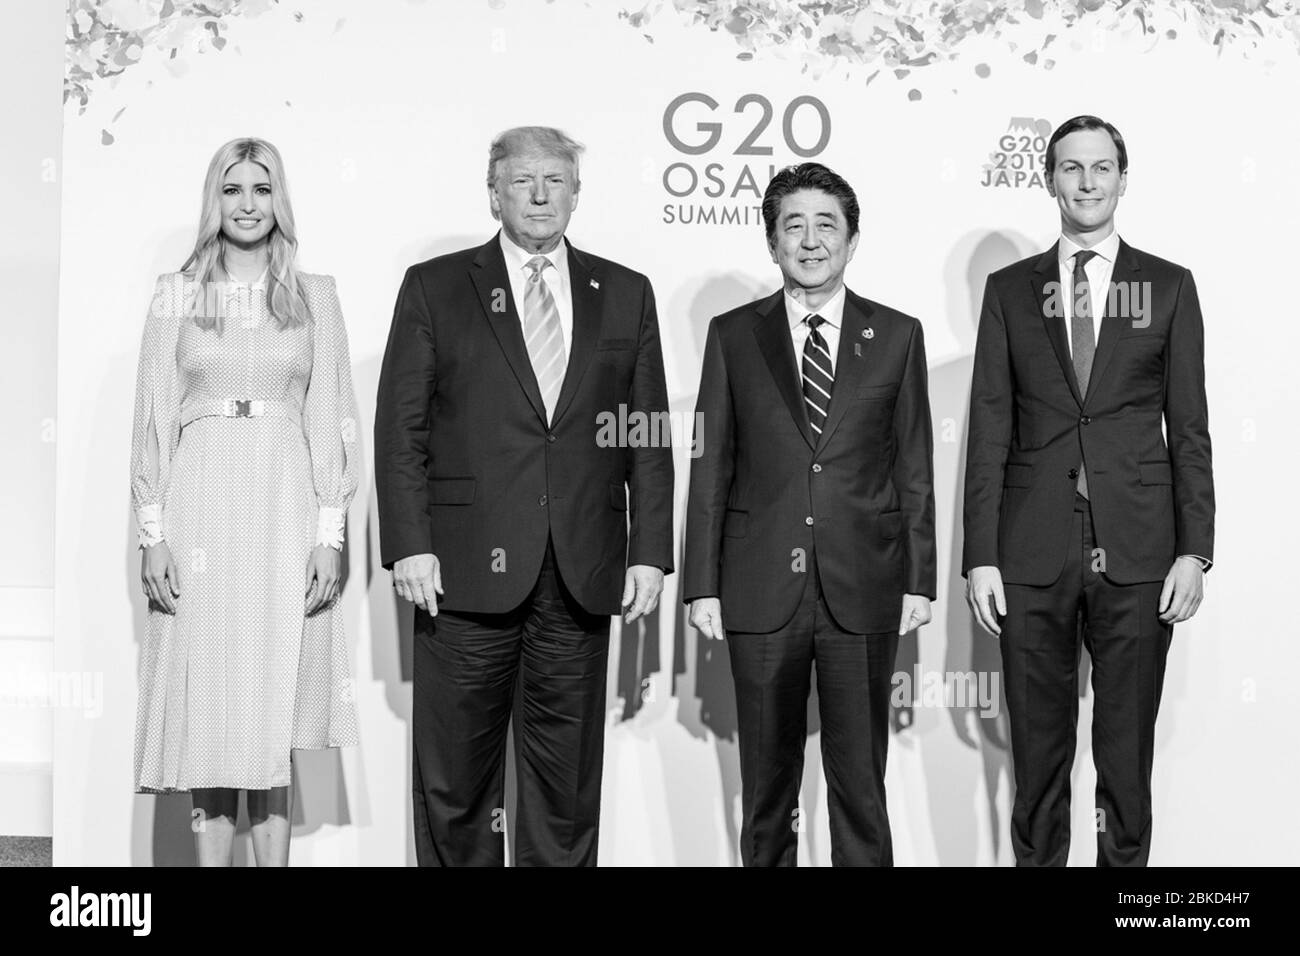 Ivanka trump at g20 summit Black and White Stock Photos & Images - Alamy